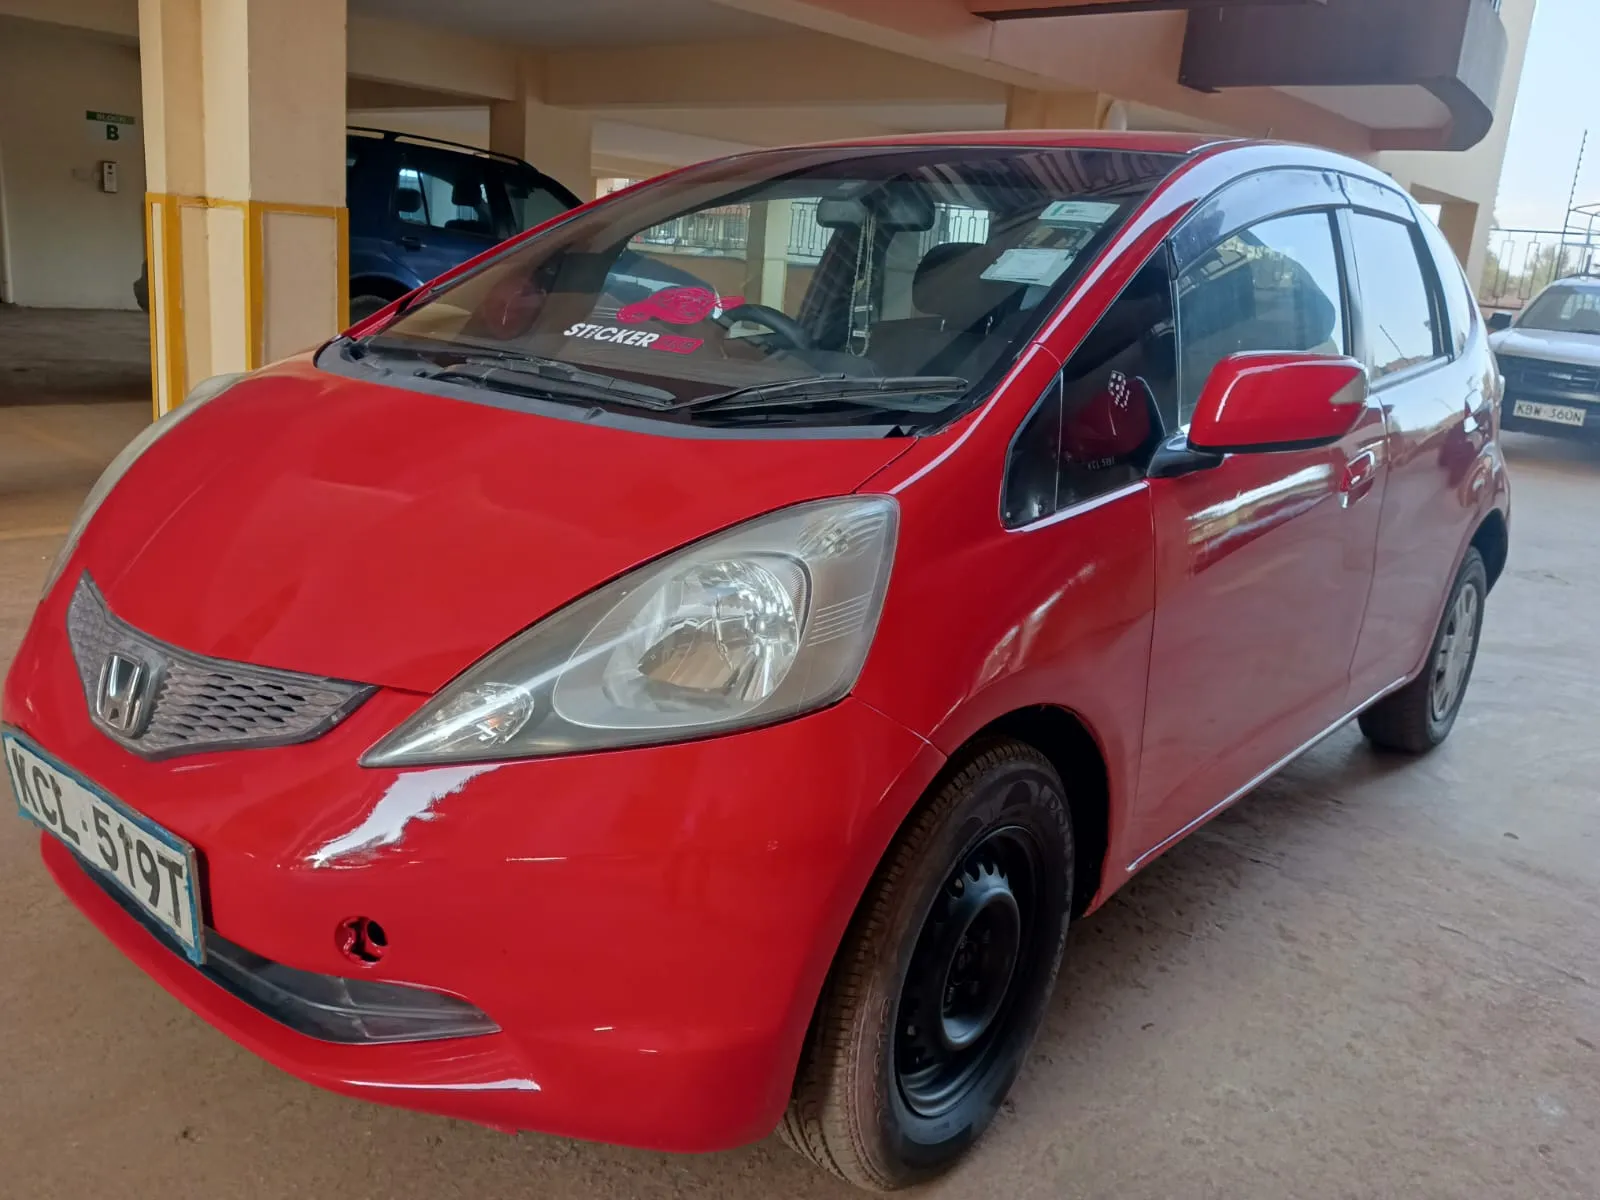 Honda fit You Pay 30% 70% installments Deposit Trade in OK Wow